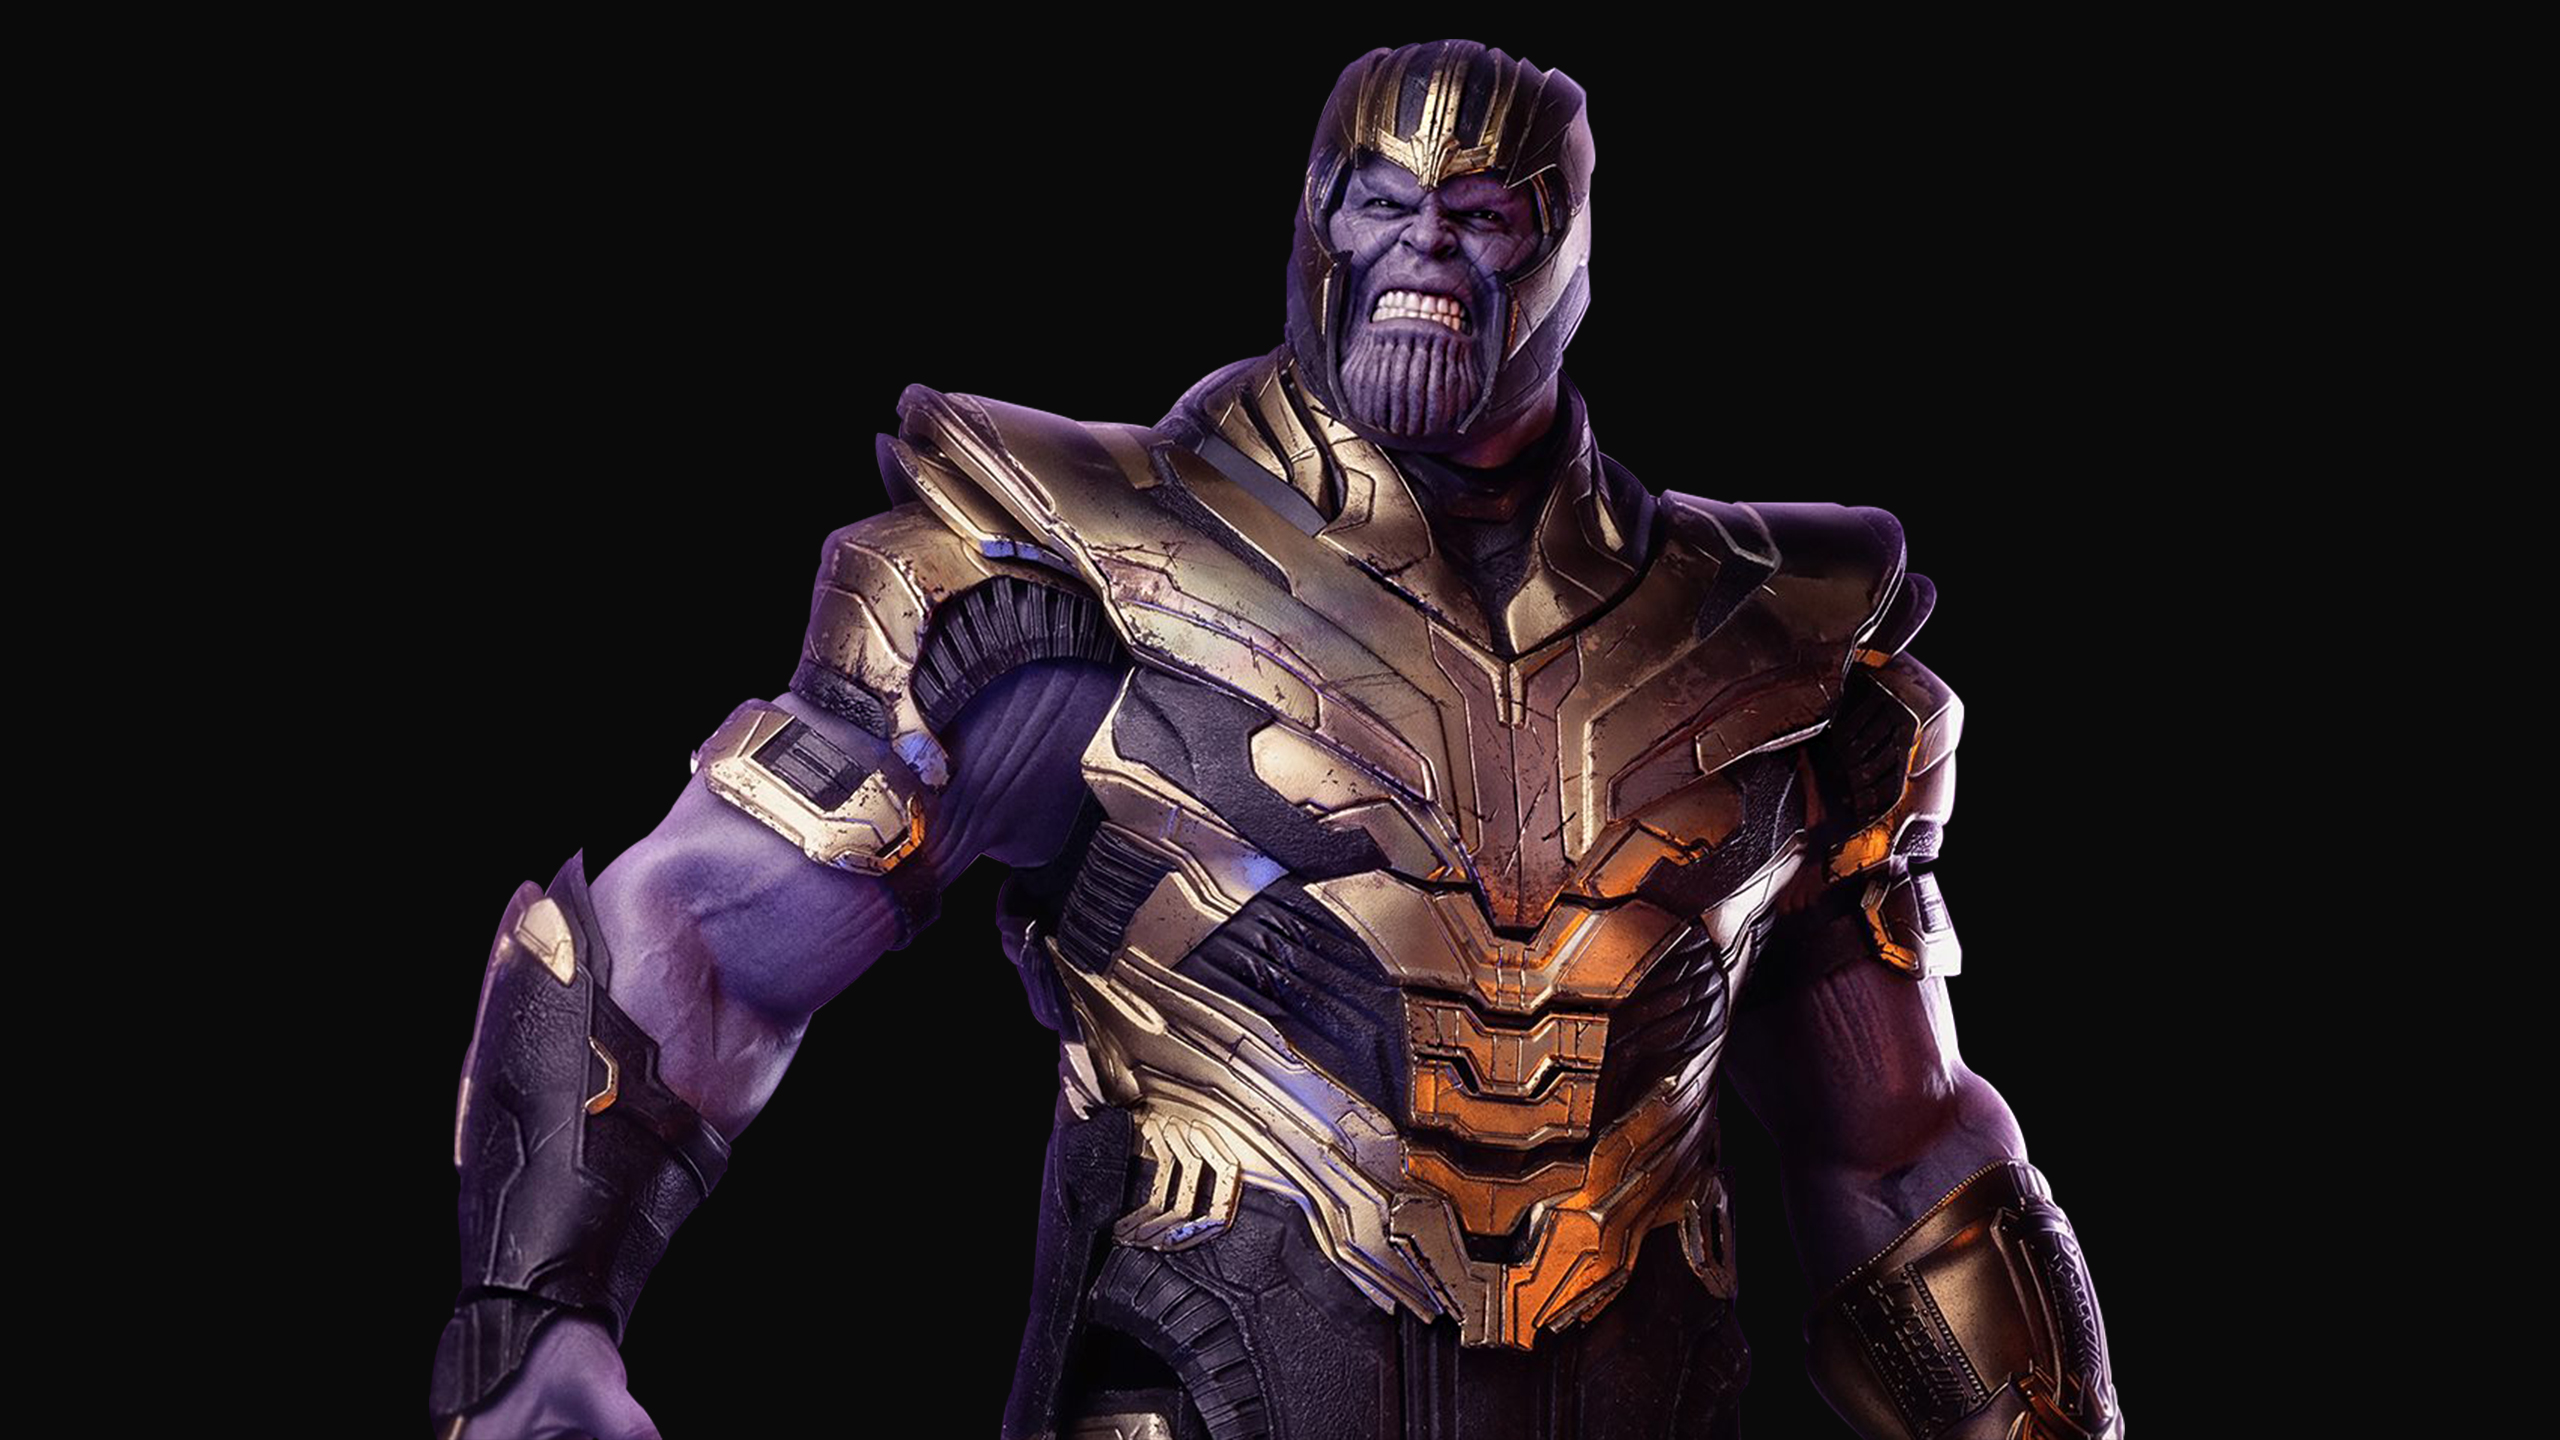 Thanos Quotes Wallpaper 4k Download 1920x1080 Wallpaper | Quotes and